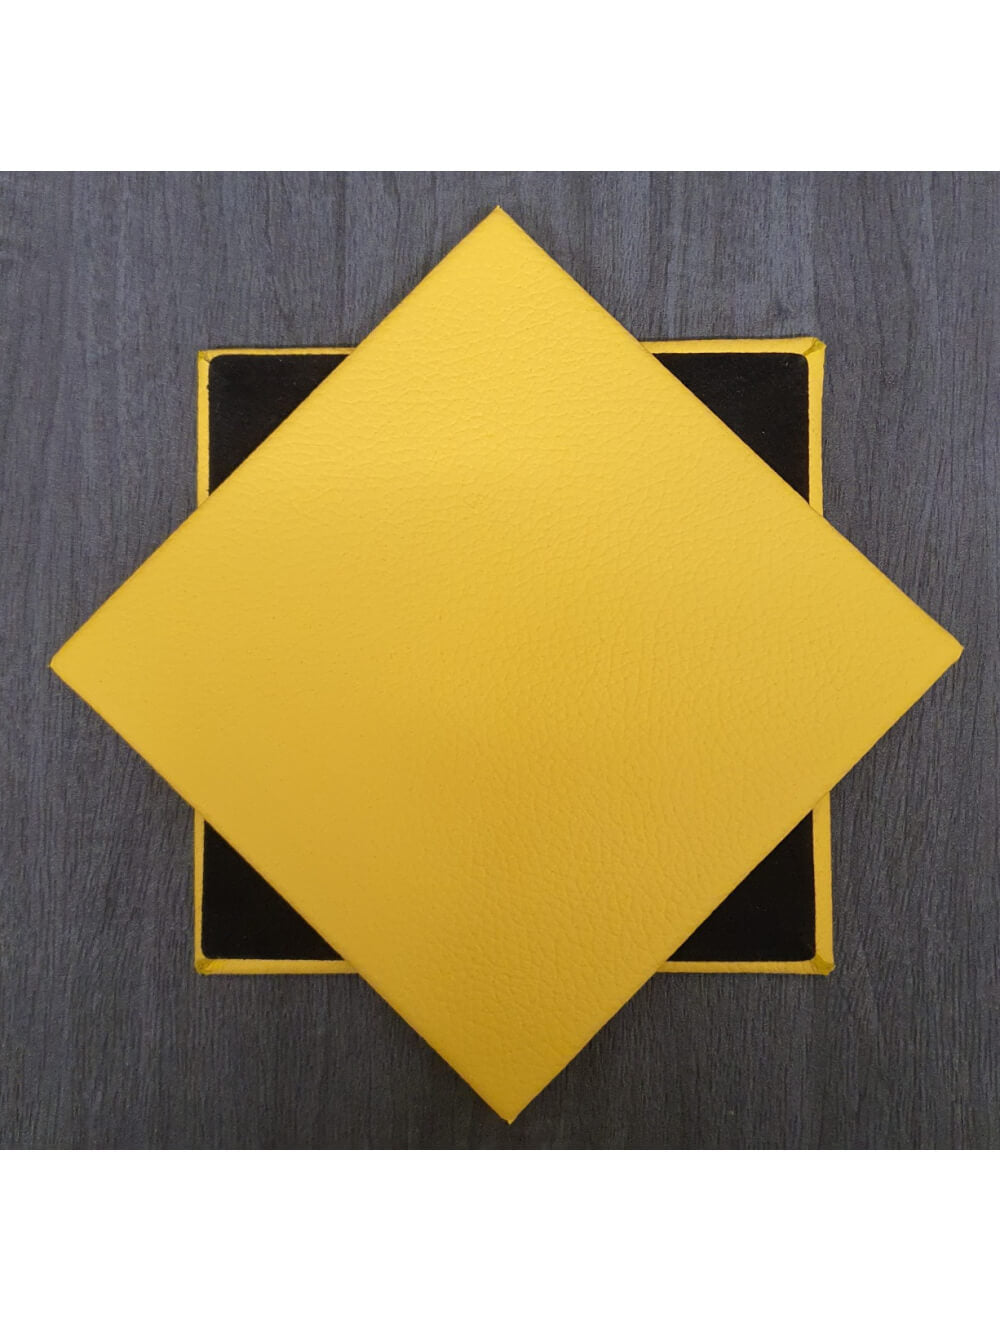 Yellow Shelly Leather Coaster- 10cm Sq (sale item)